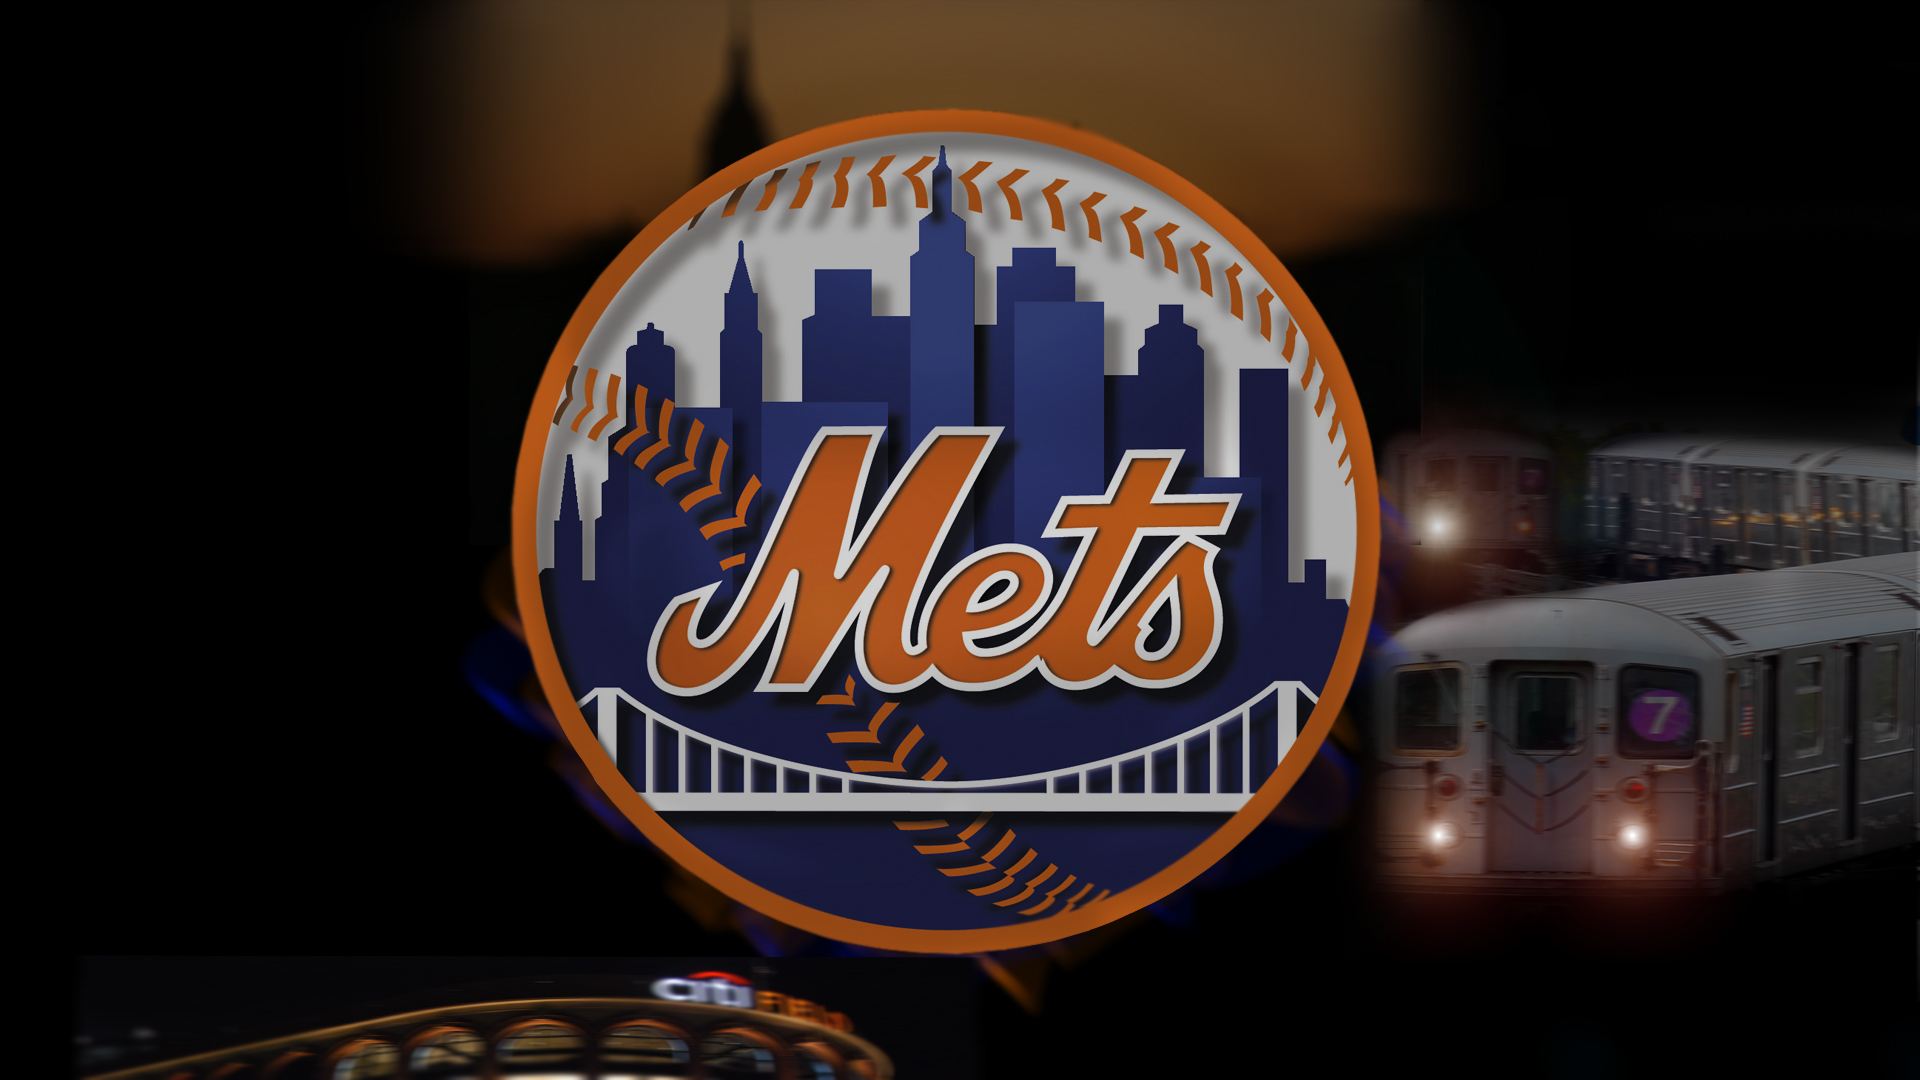 New York Mets Wallpapers Images Photos Pictures Backgrounds HD Wallpapers Download Free Images Wallpaper [wallpaper981.blogspot.com]